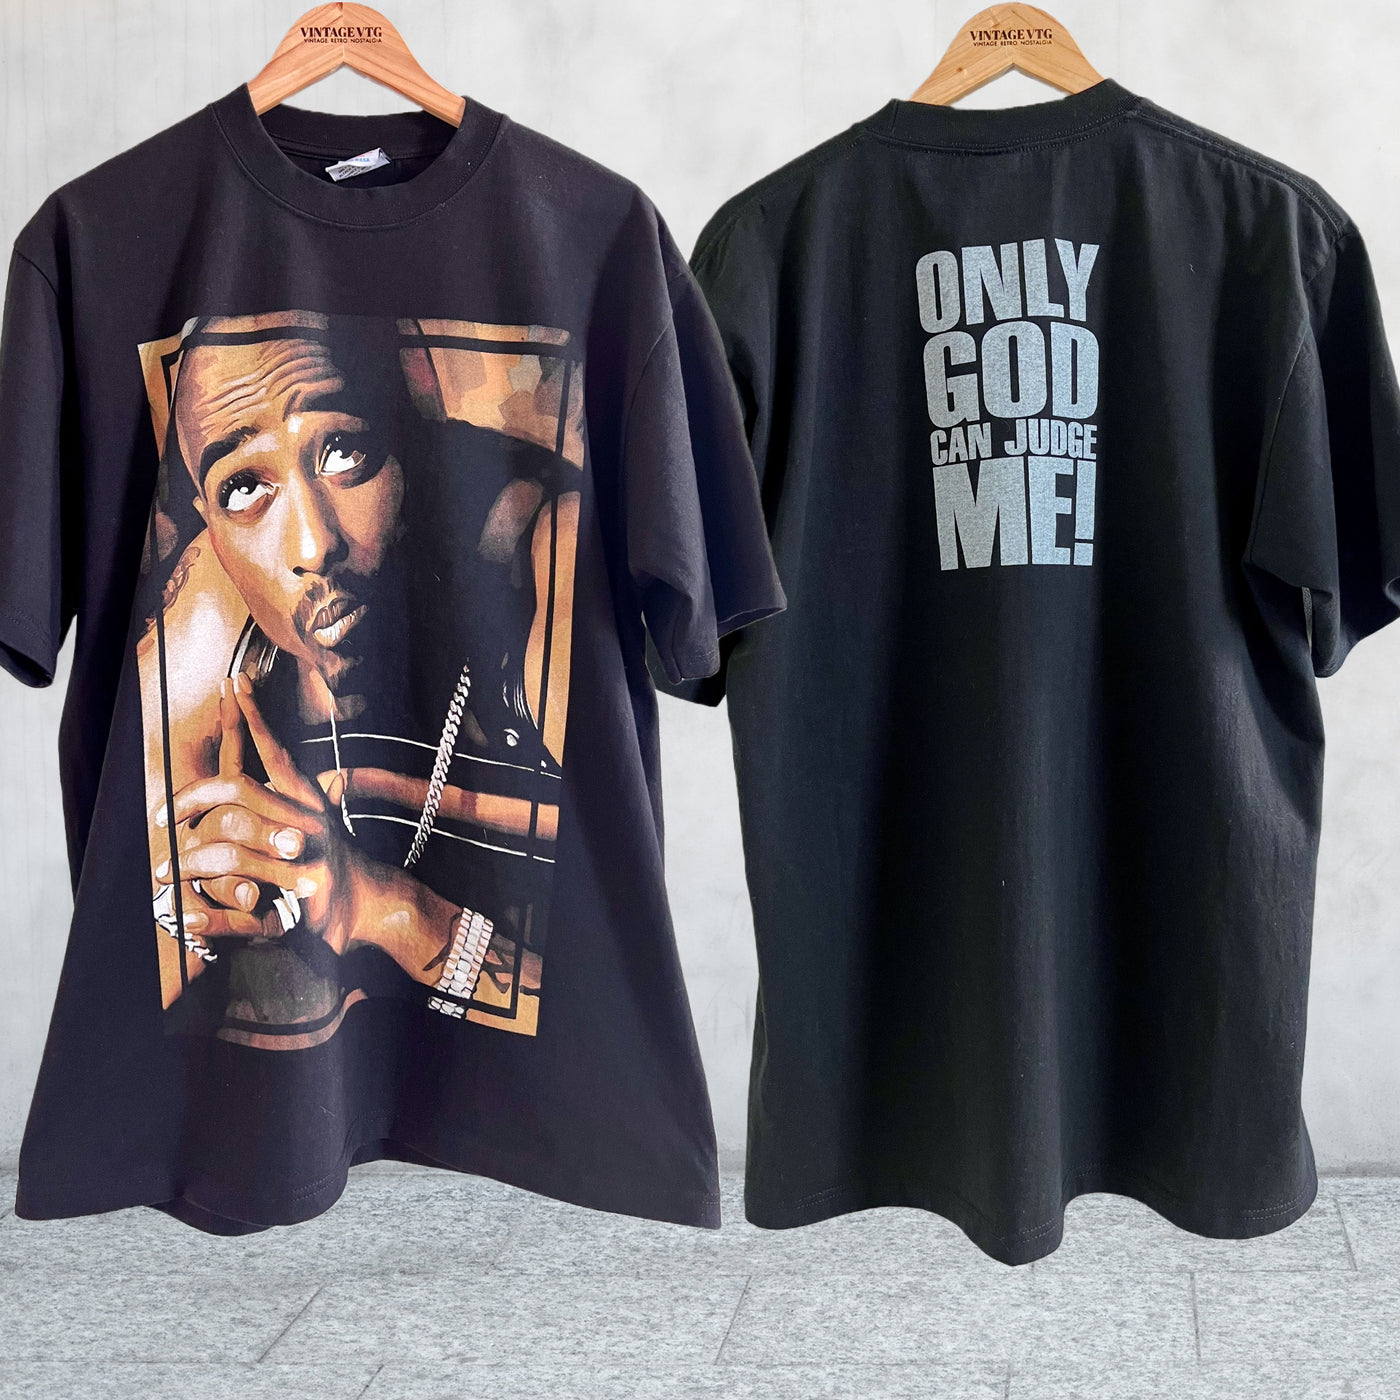 Rare Vintage Tupac "ONLY GOD CAN JUDGE ME!" double sided big print T-shirt